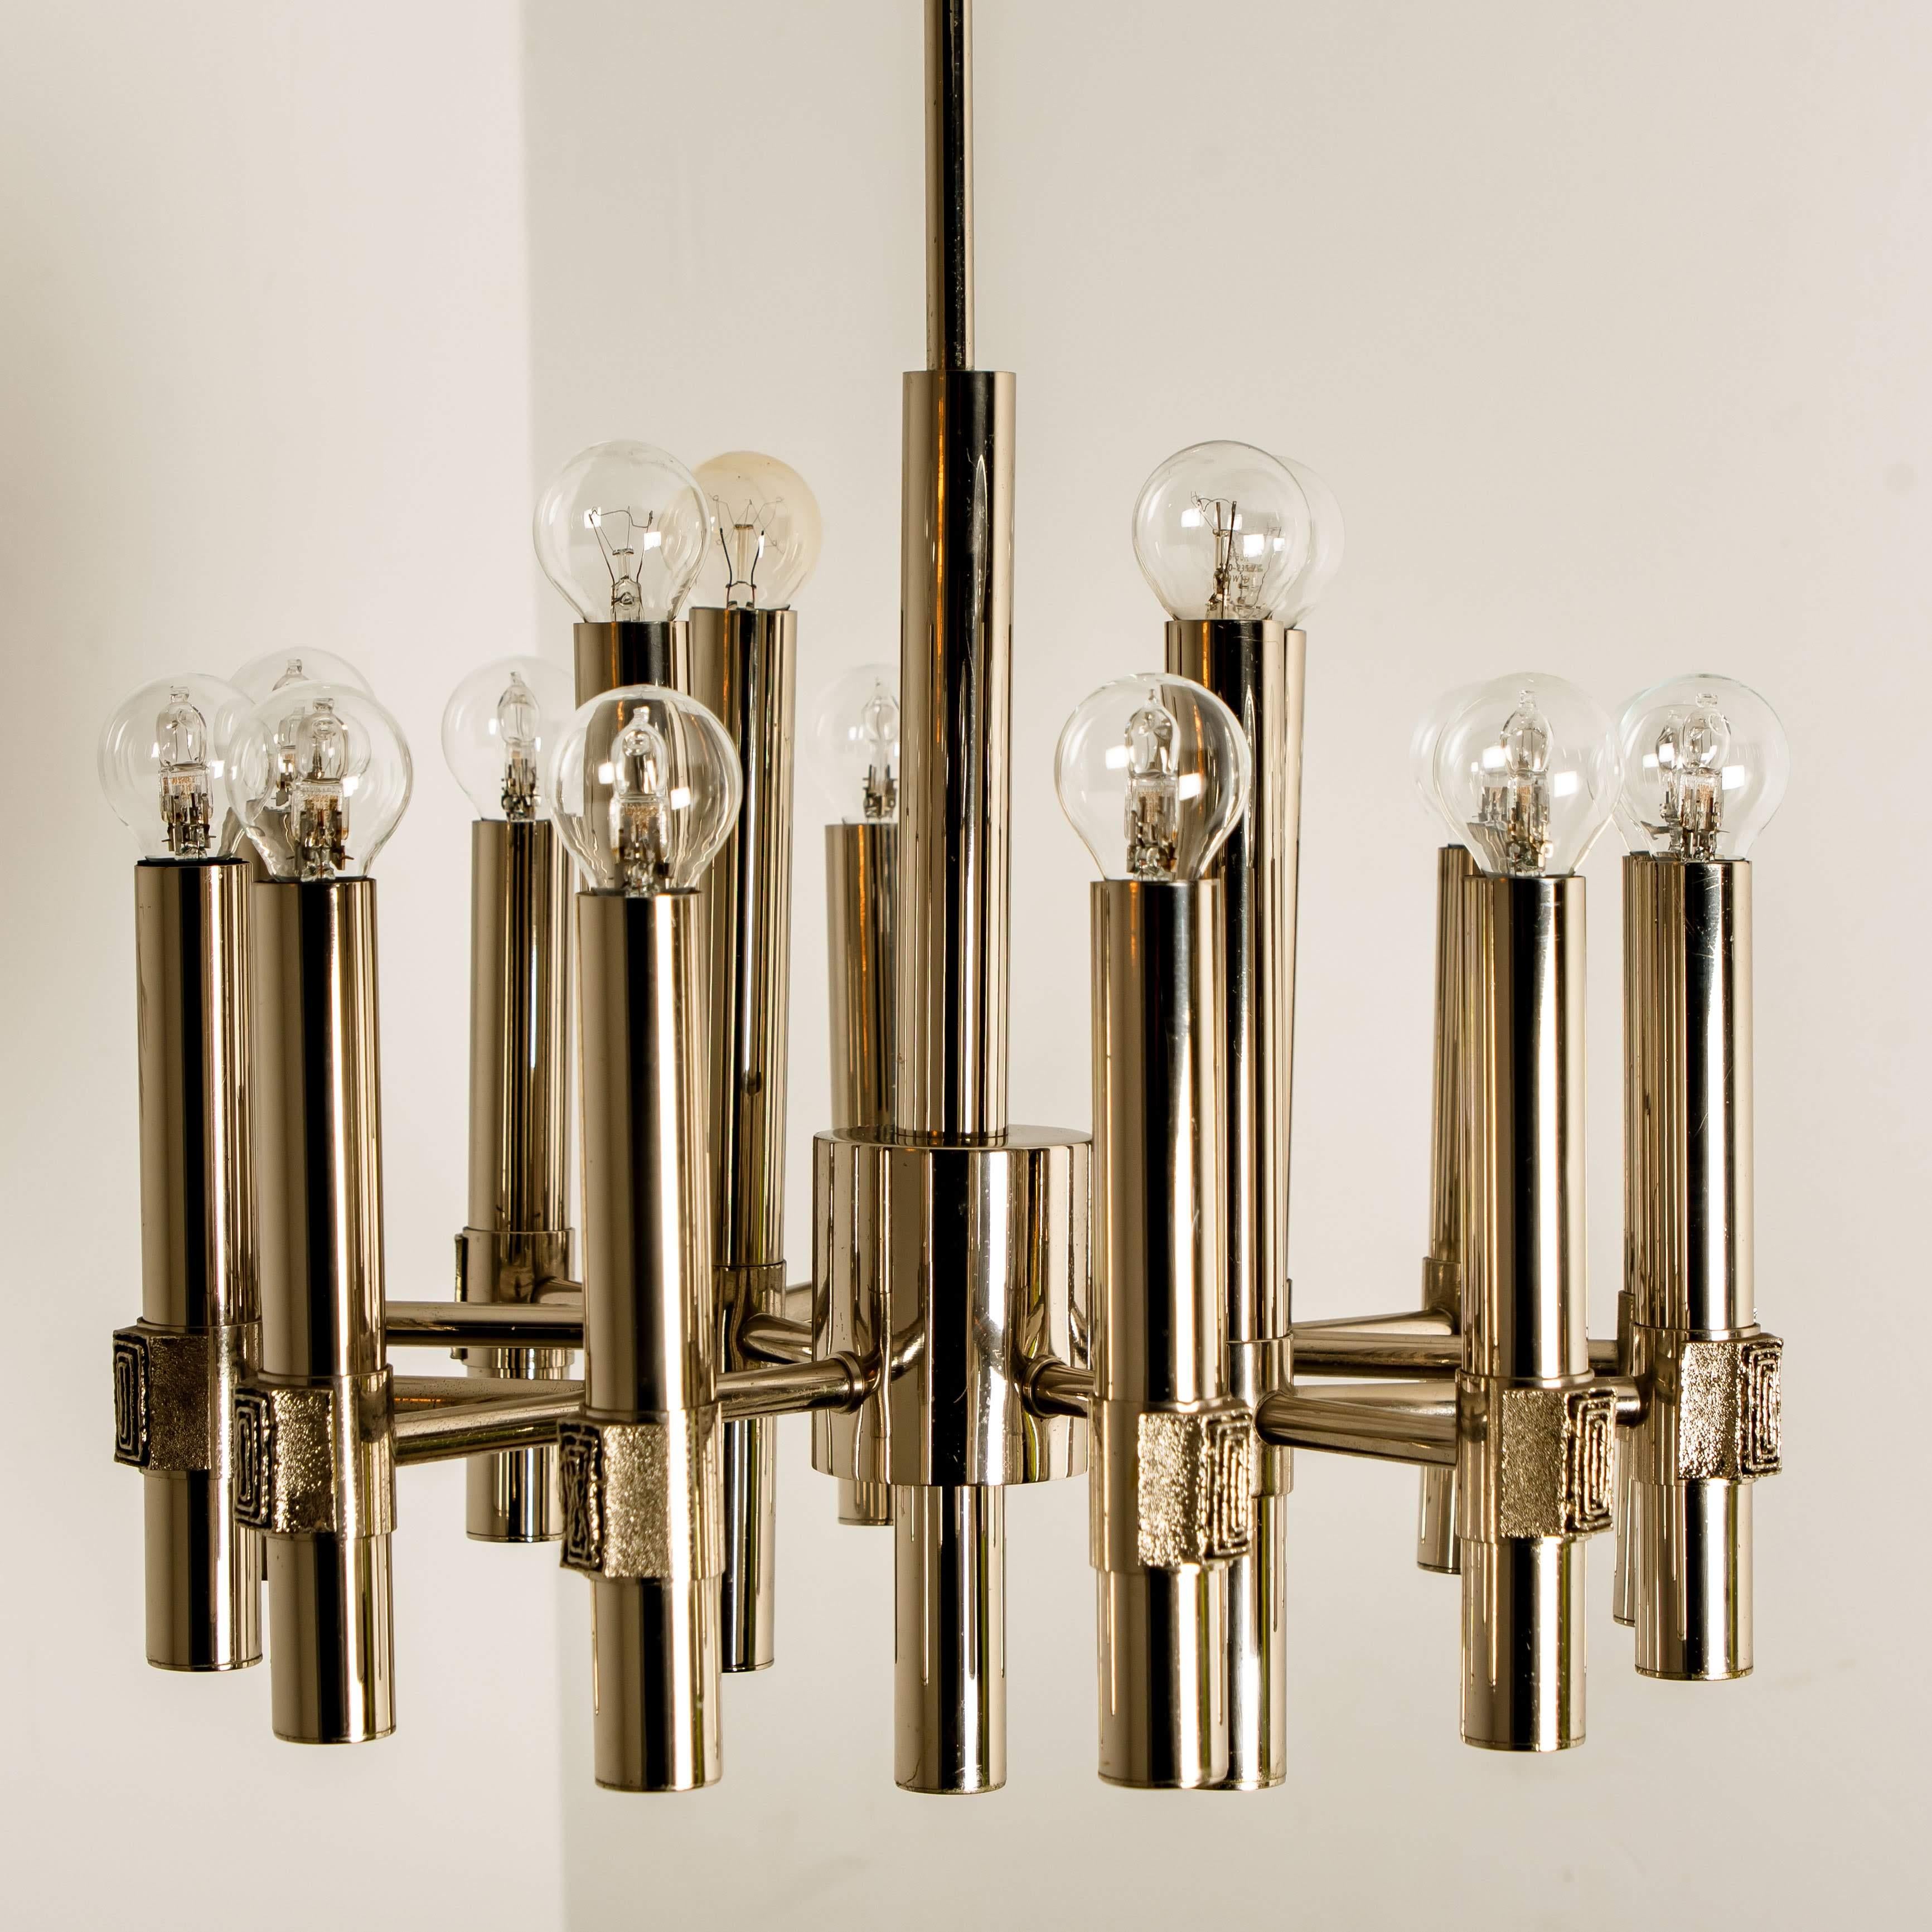 Impressive sputnik style chandelier by Angelo Brotto for Esperia Italia, brass ramificated structure with 12 arms.

Dimensions:
35.4 inch (90 cm) height (total height) height only the body 14.6 inch (37 cm)
Diameter 17.3 inch (44 cm).

Cleaned